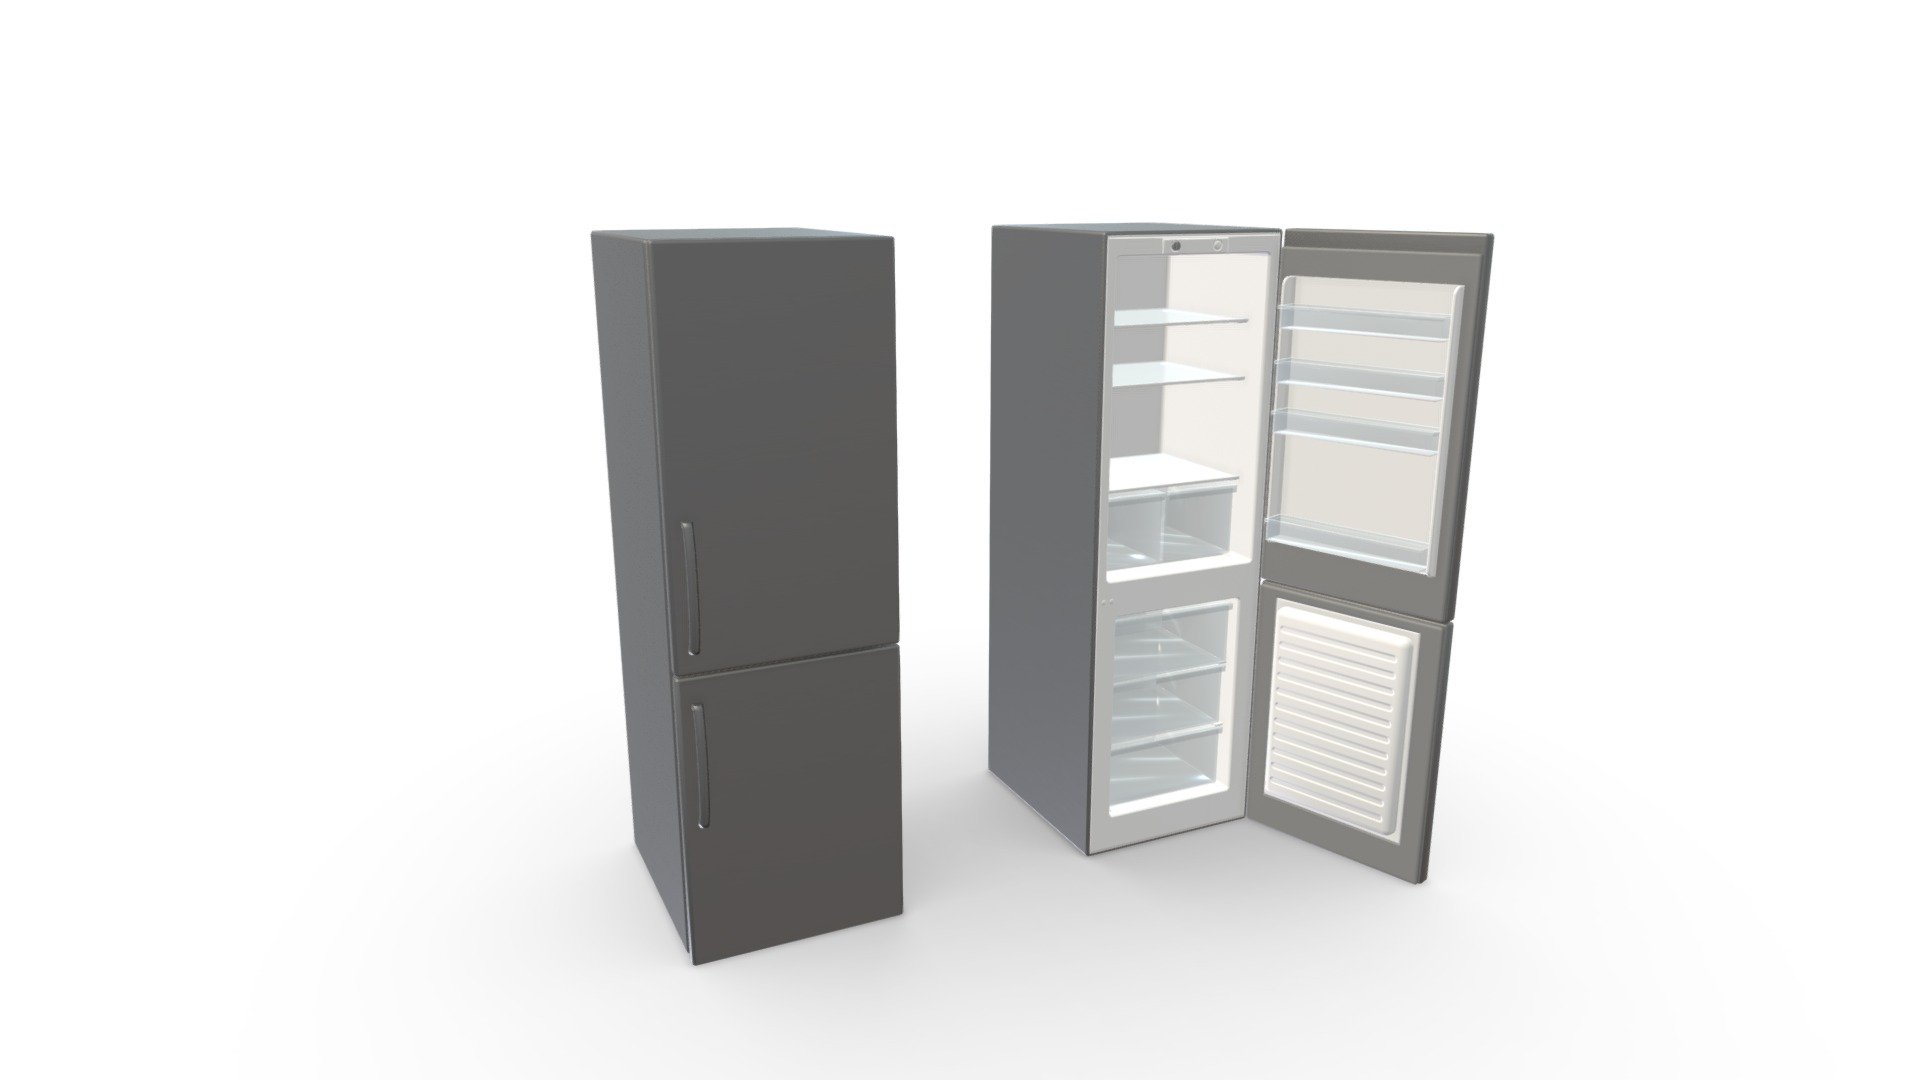 Fridge with opening doors and drawers 3d model